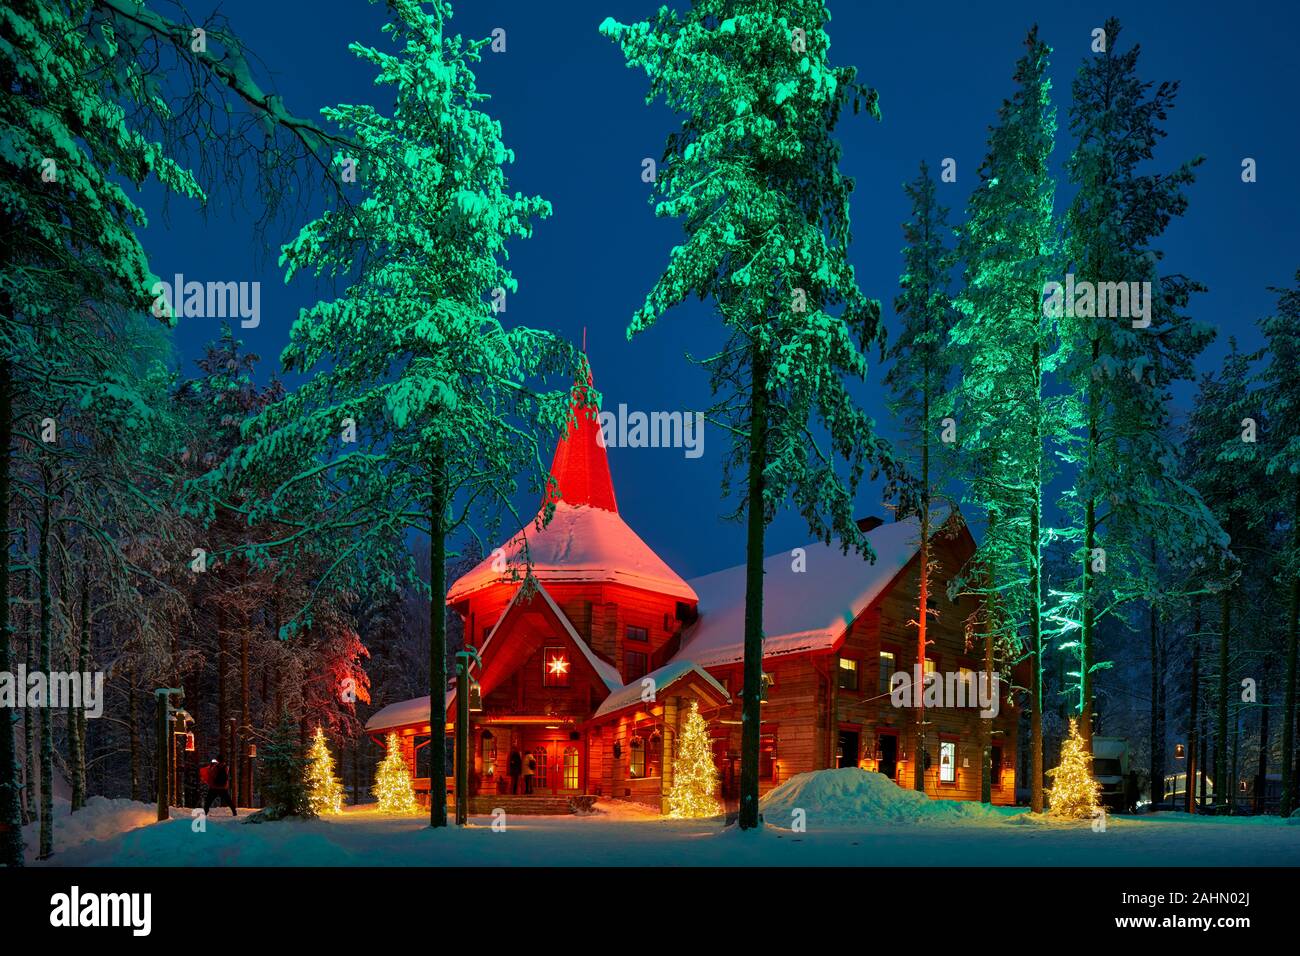 Finnish Rovaniemi a city in Finland and the region of Lapland, Santa Claus Village Mrs. Claus Christmas Cottage in the forest at night Stock Photo